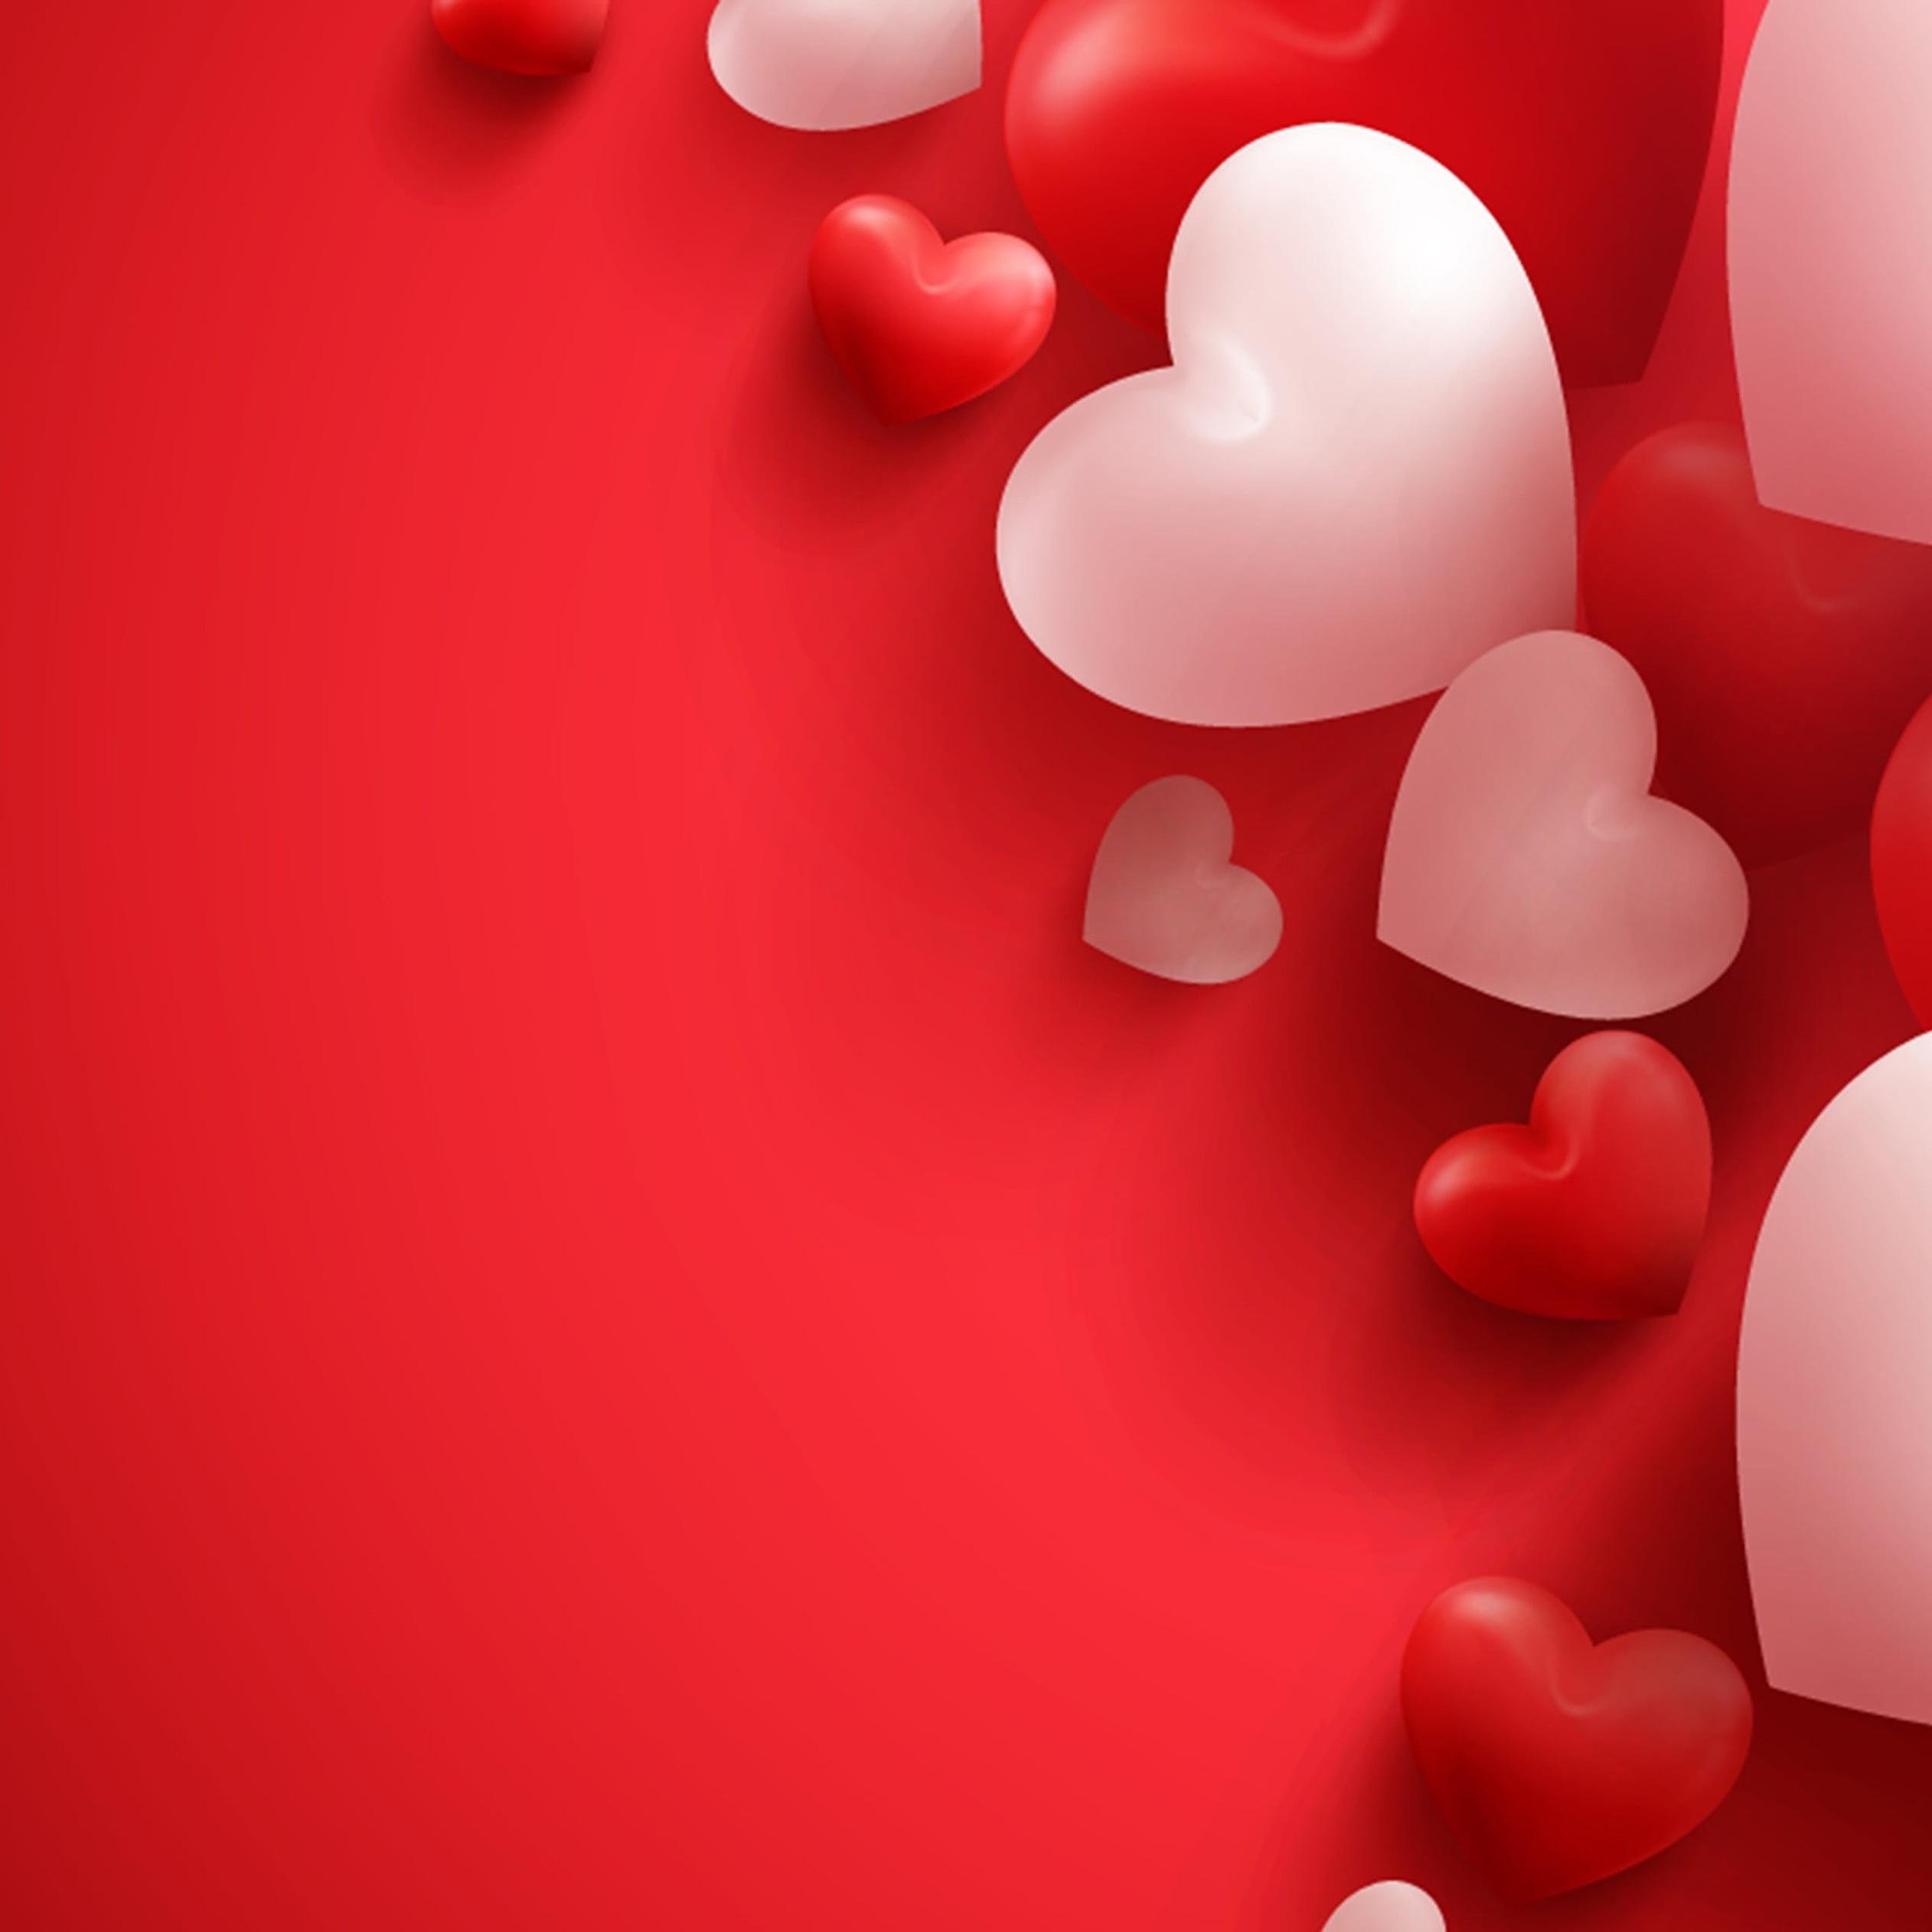 Love wallpaper with red and white hearts